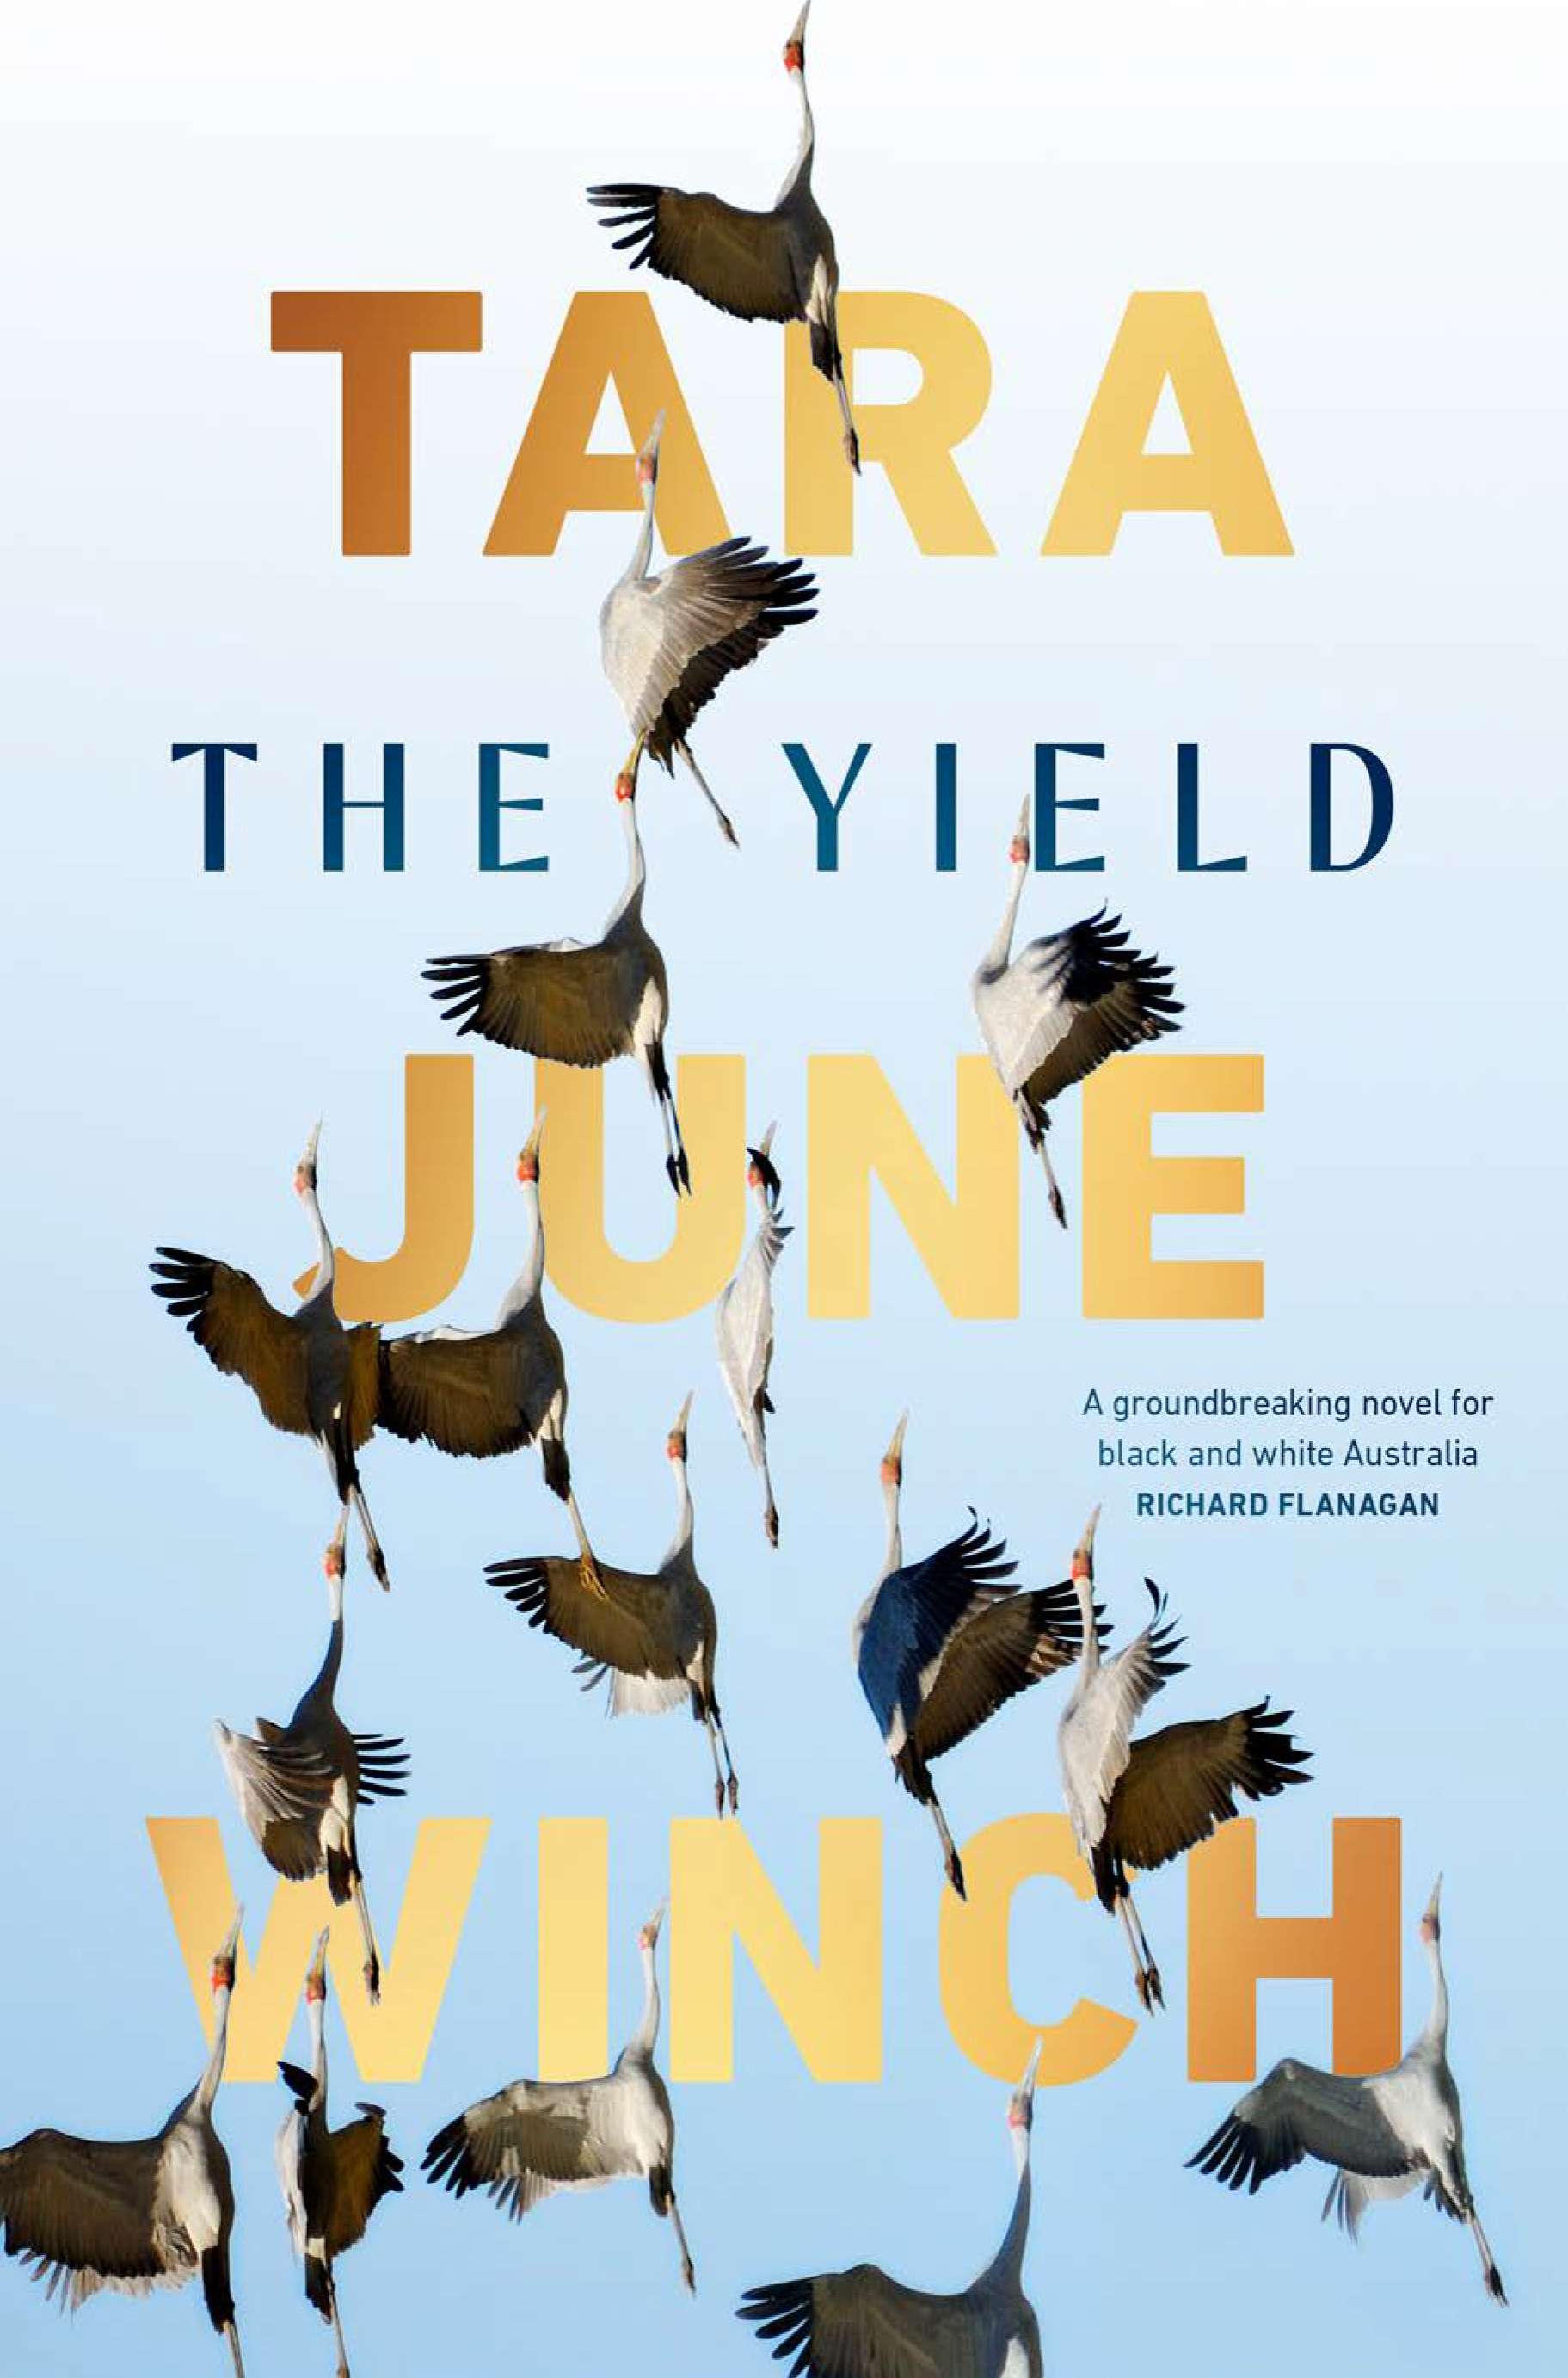 The Yield by Tara June Winch book cover featuring a flock of brolgas dancing in the sky